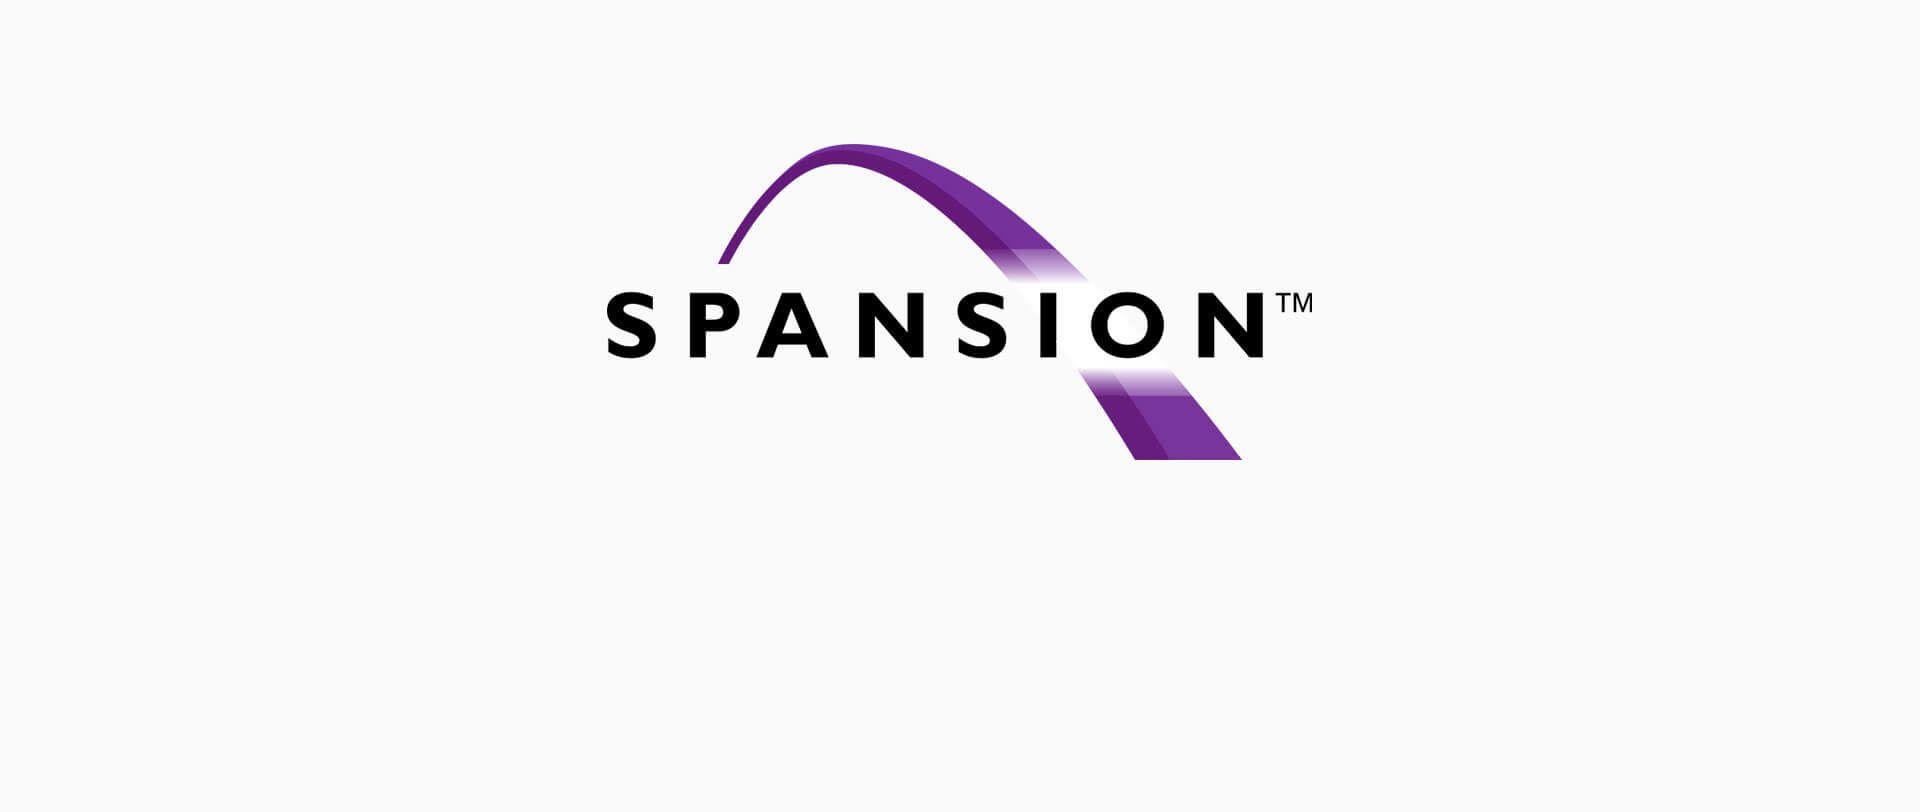 Spansion Logo - Spansion tracks fitness for fun - Sonic Boom Wellness